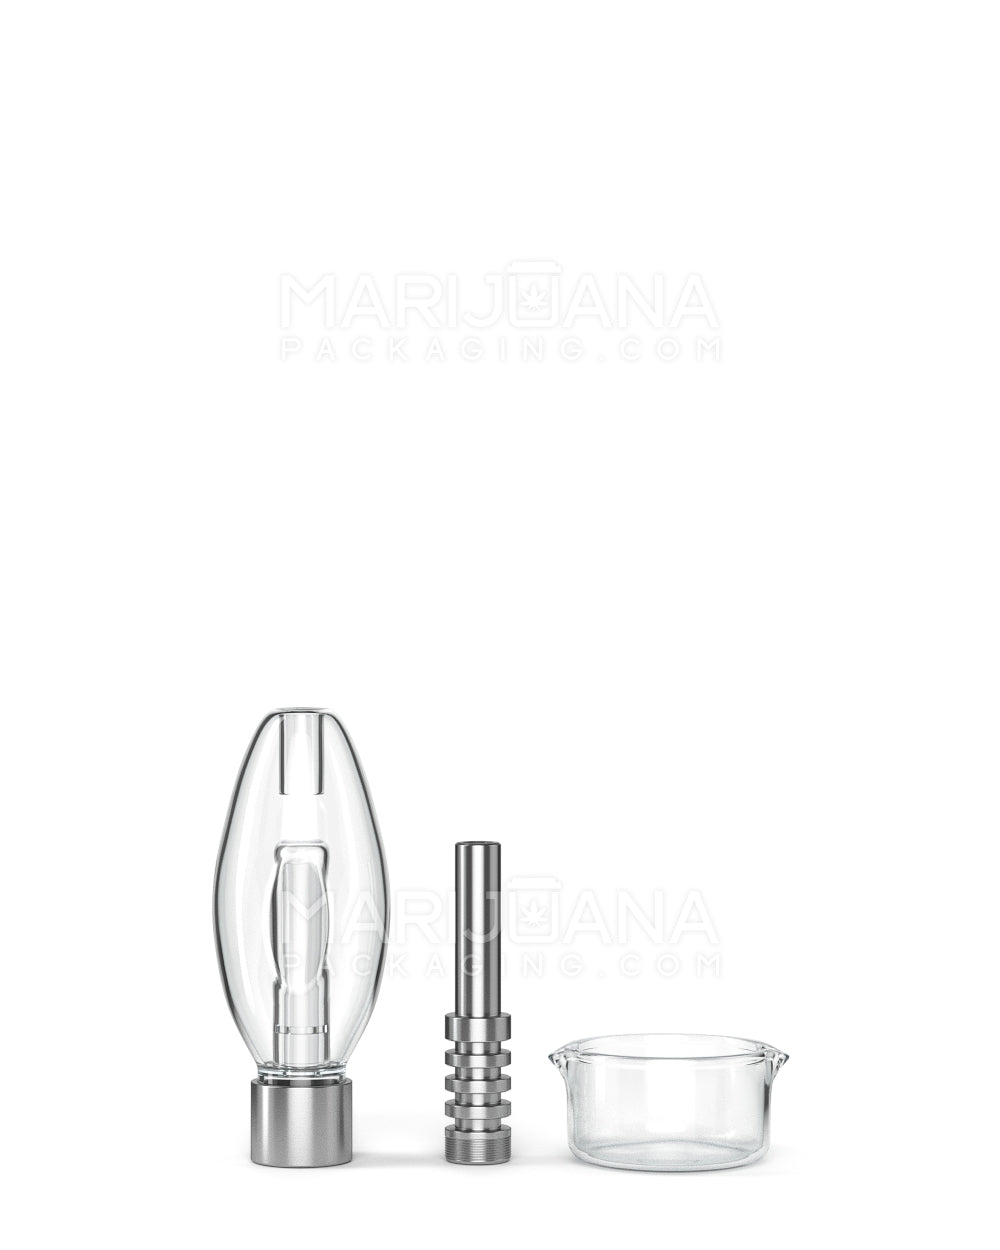 Nectar Collector Dab Pipe w/ Titanium Tip | 5.5in Long - 14mm Attachment - Clear - 2